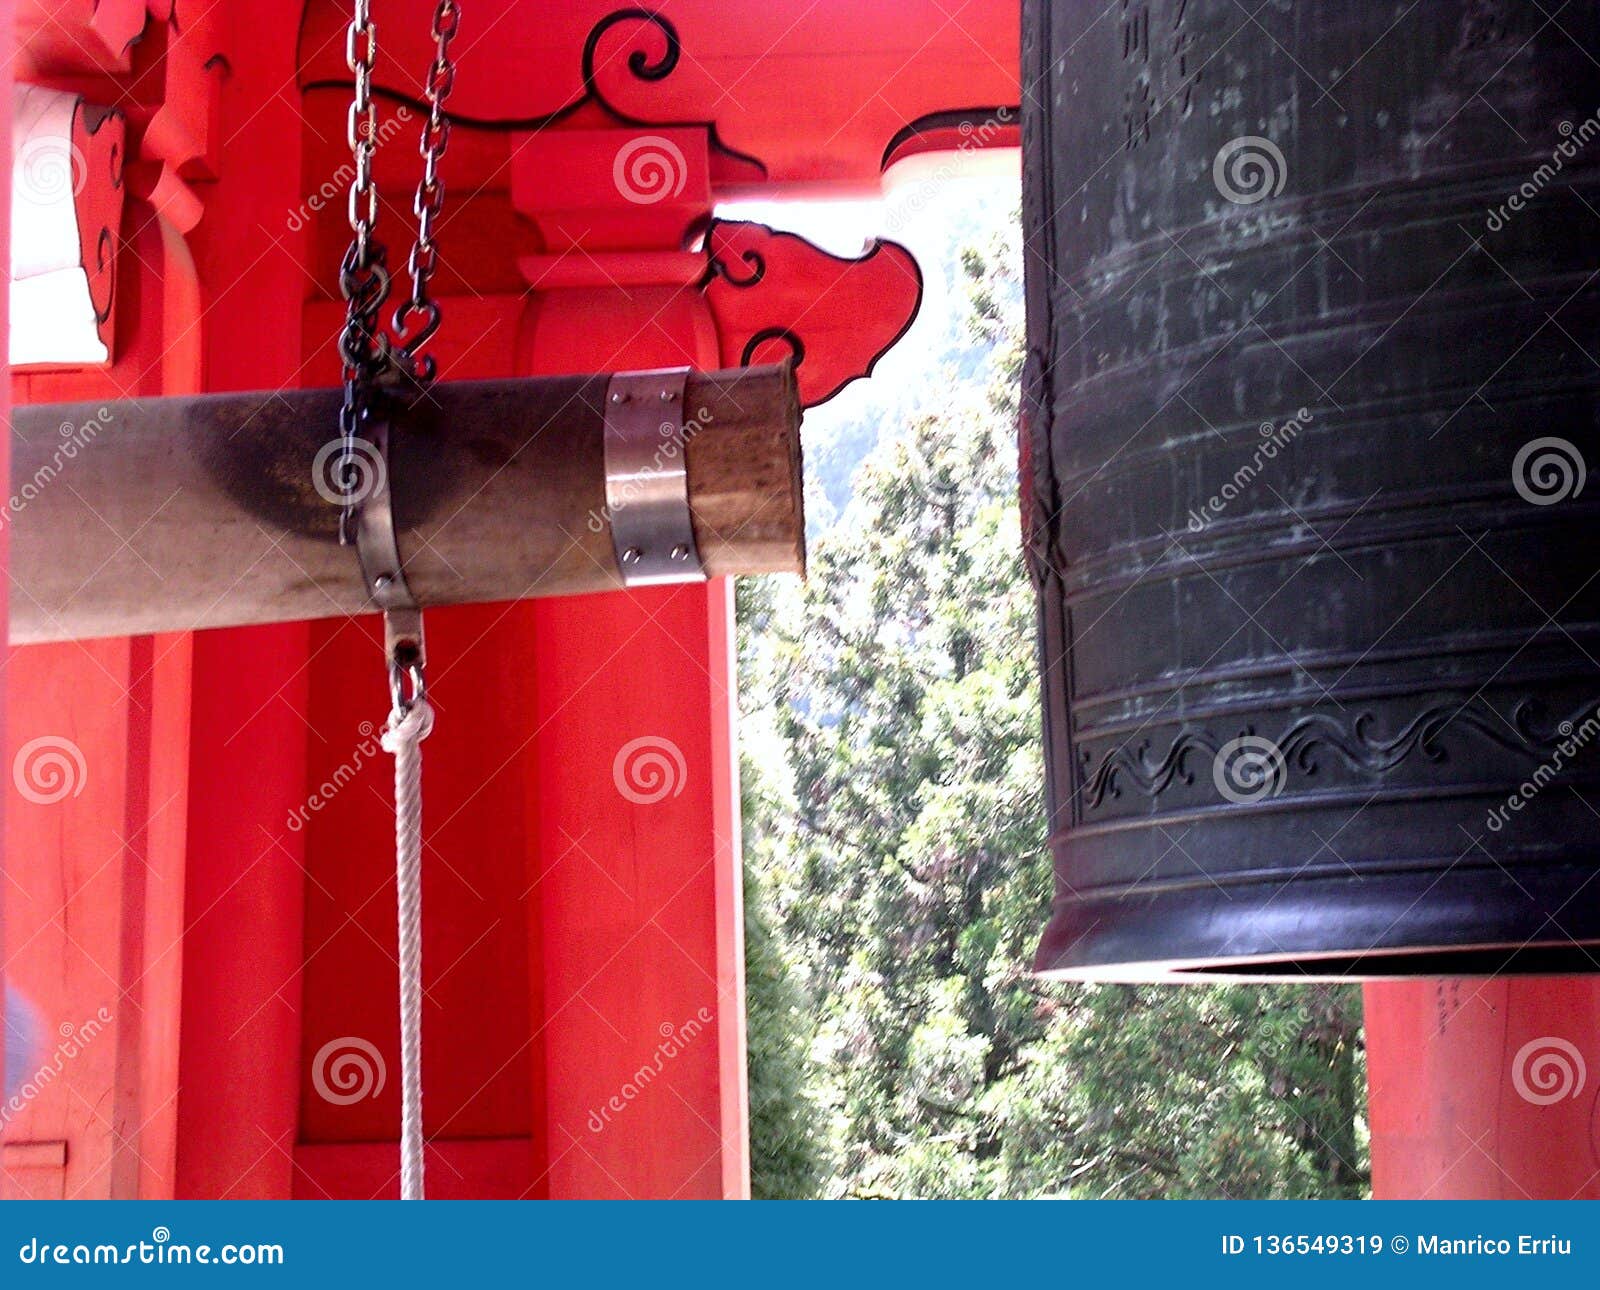 japanese temple bell in japan